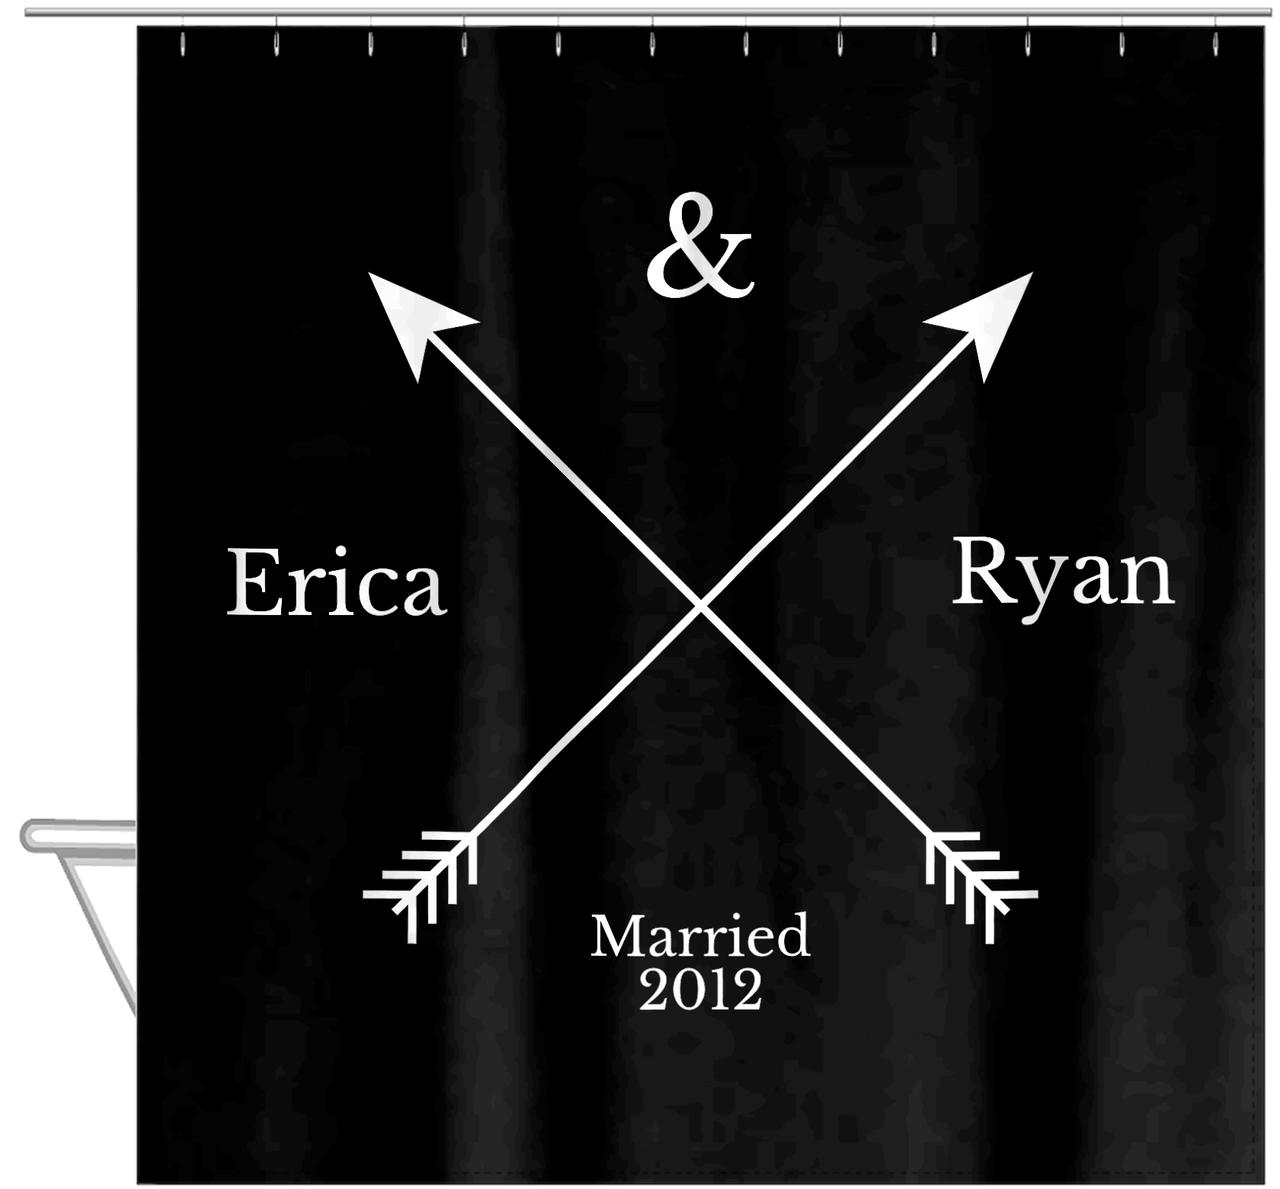 Personalized Arrows Shower Curtain - Black and White - Couple Names with Wedding Year - Hanging View